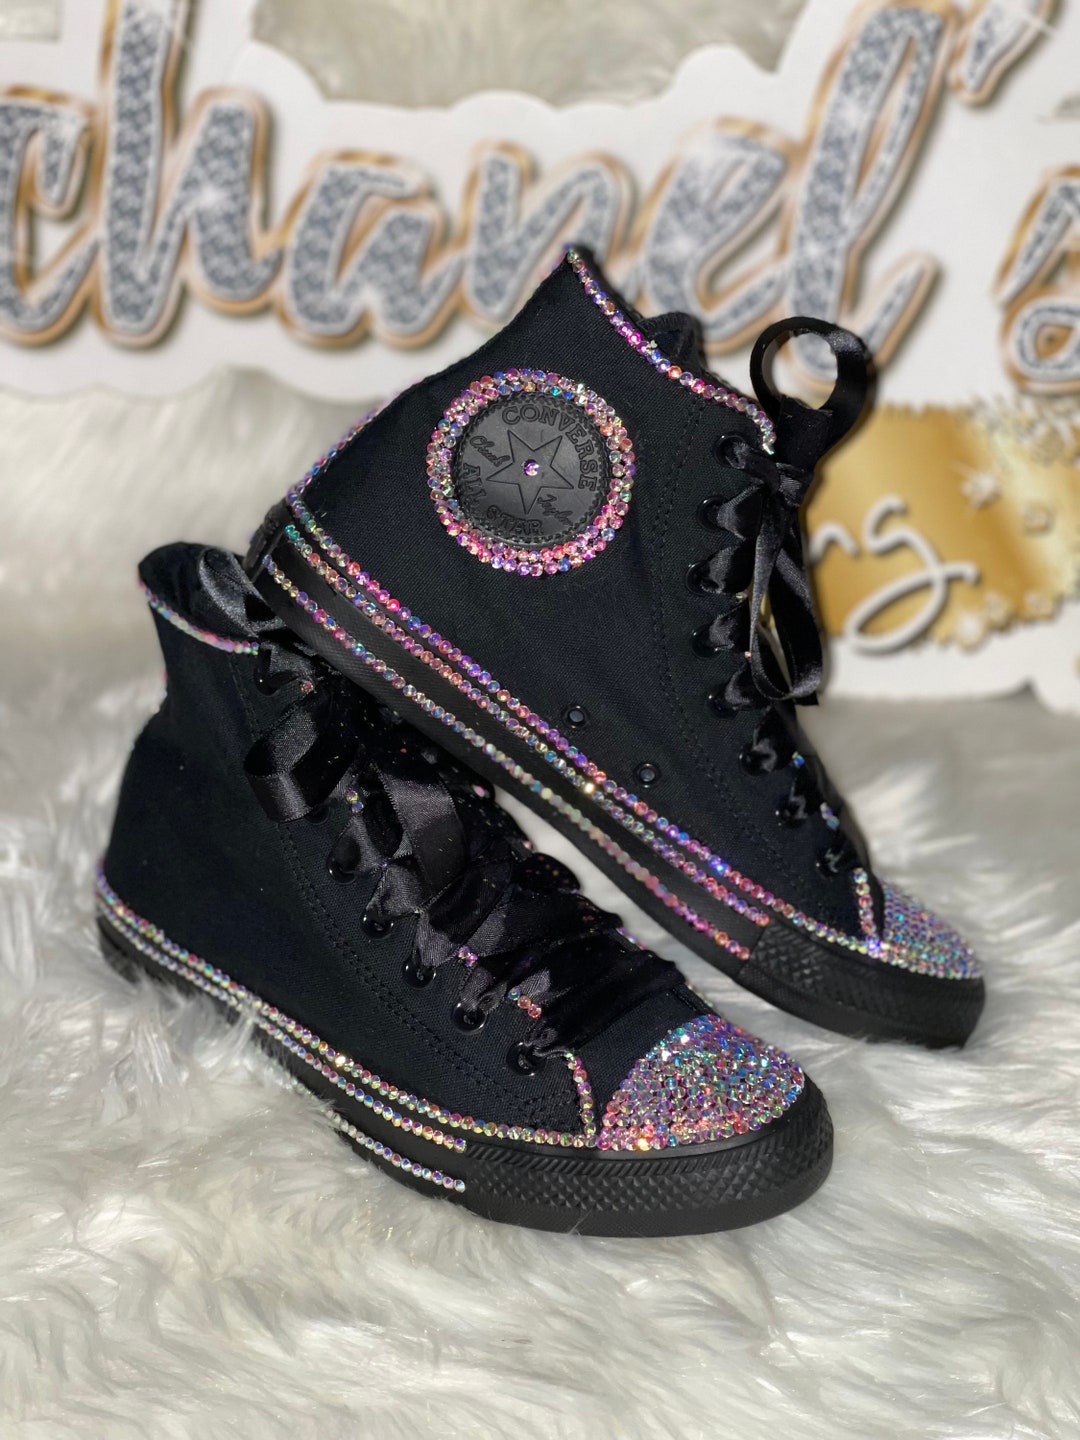 WOMEN'S Black Bling Converse All Star Chuck Taylor Sneakers High-top - Etsy